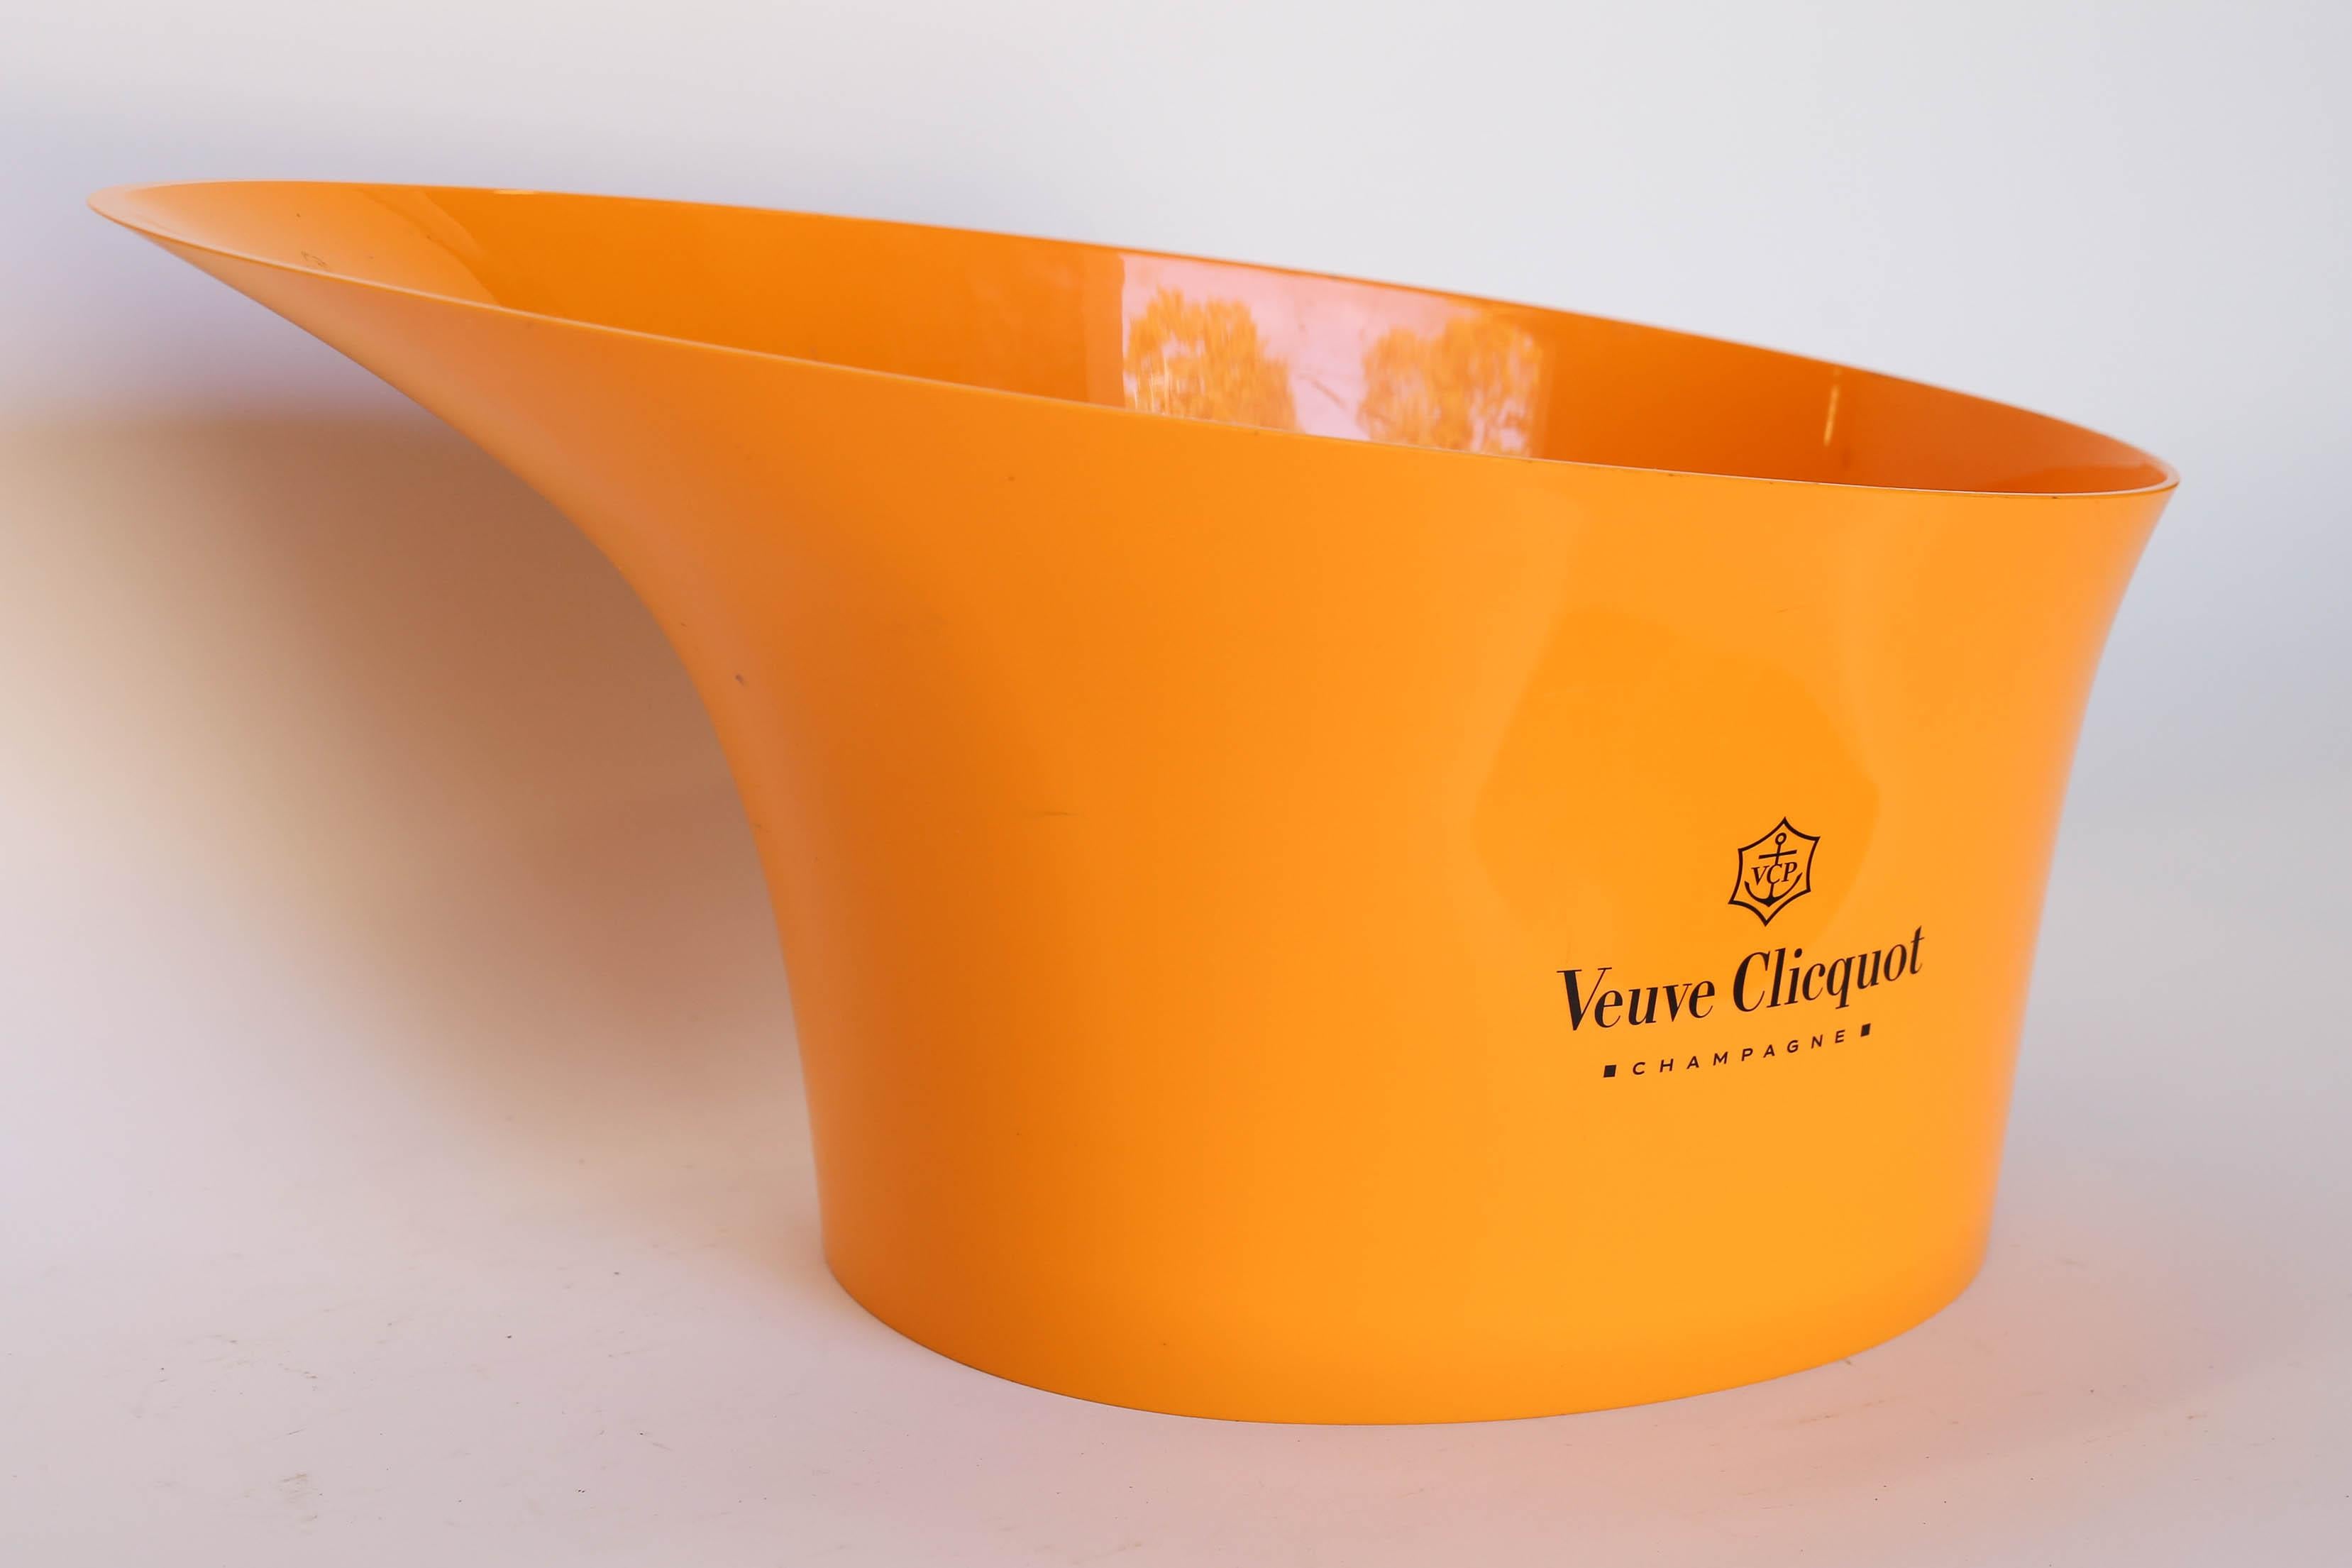 A fabulous plastic double or magnum champagne cooler from the House of Veuve Clicquot. A wonderful addition to your bar or to use poolside. The iconic orange color of Veuve Clicquot makes this a much sought after piece.